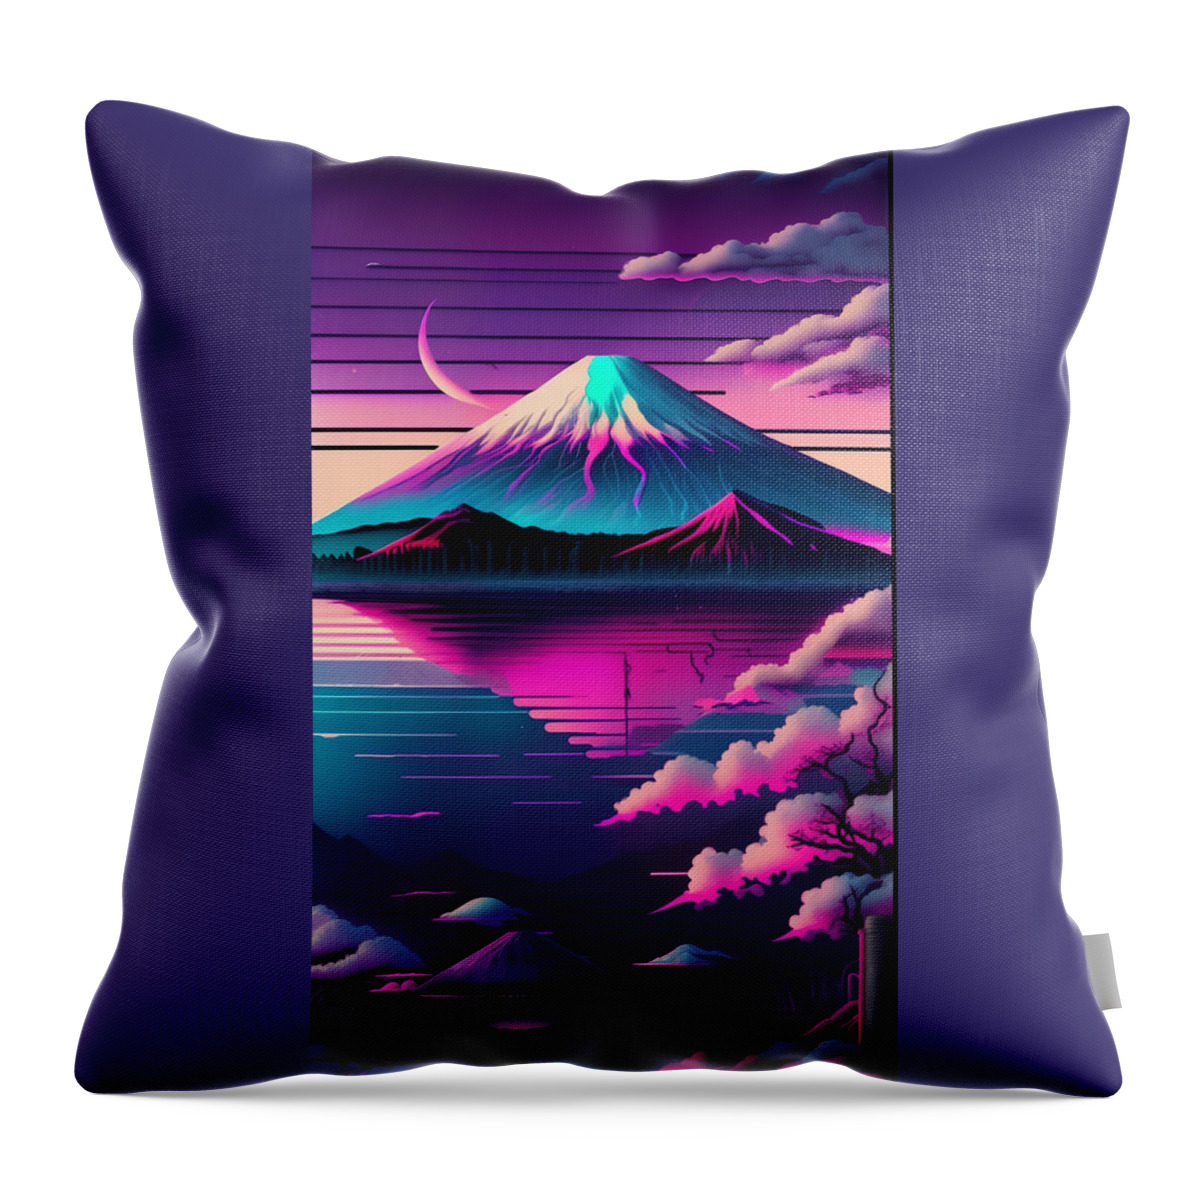 Synthwave Throw Pillow featuring the digital art Mt.Fuji #1 by Quik Digicon Art Club